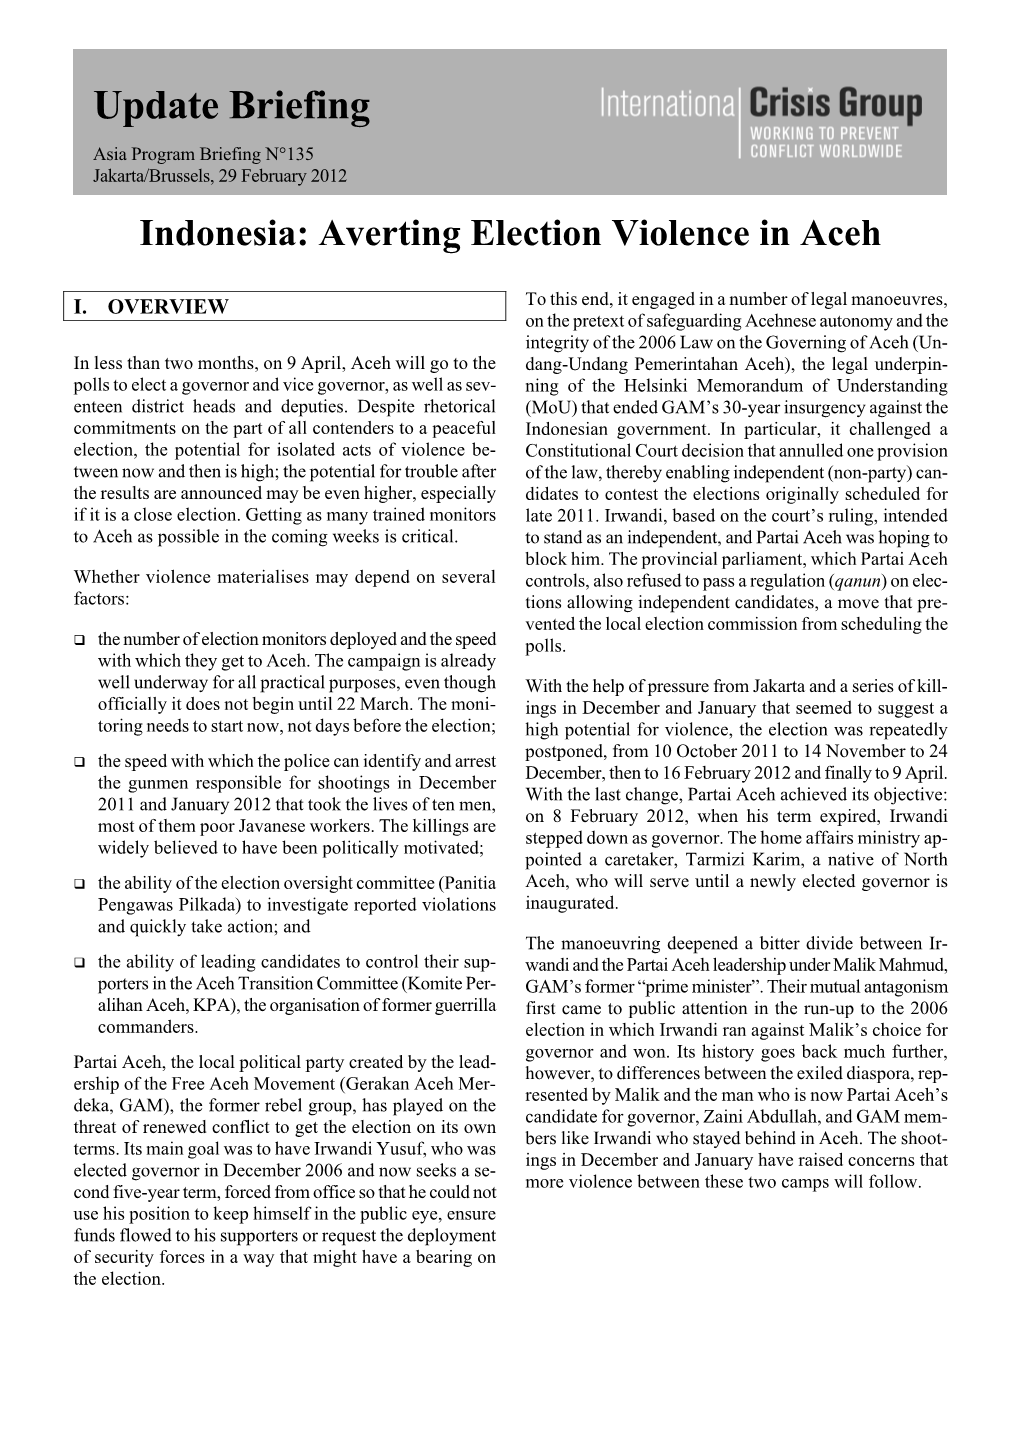 Indonesia: Averting Election Violence in Aceh